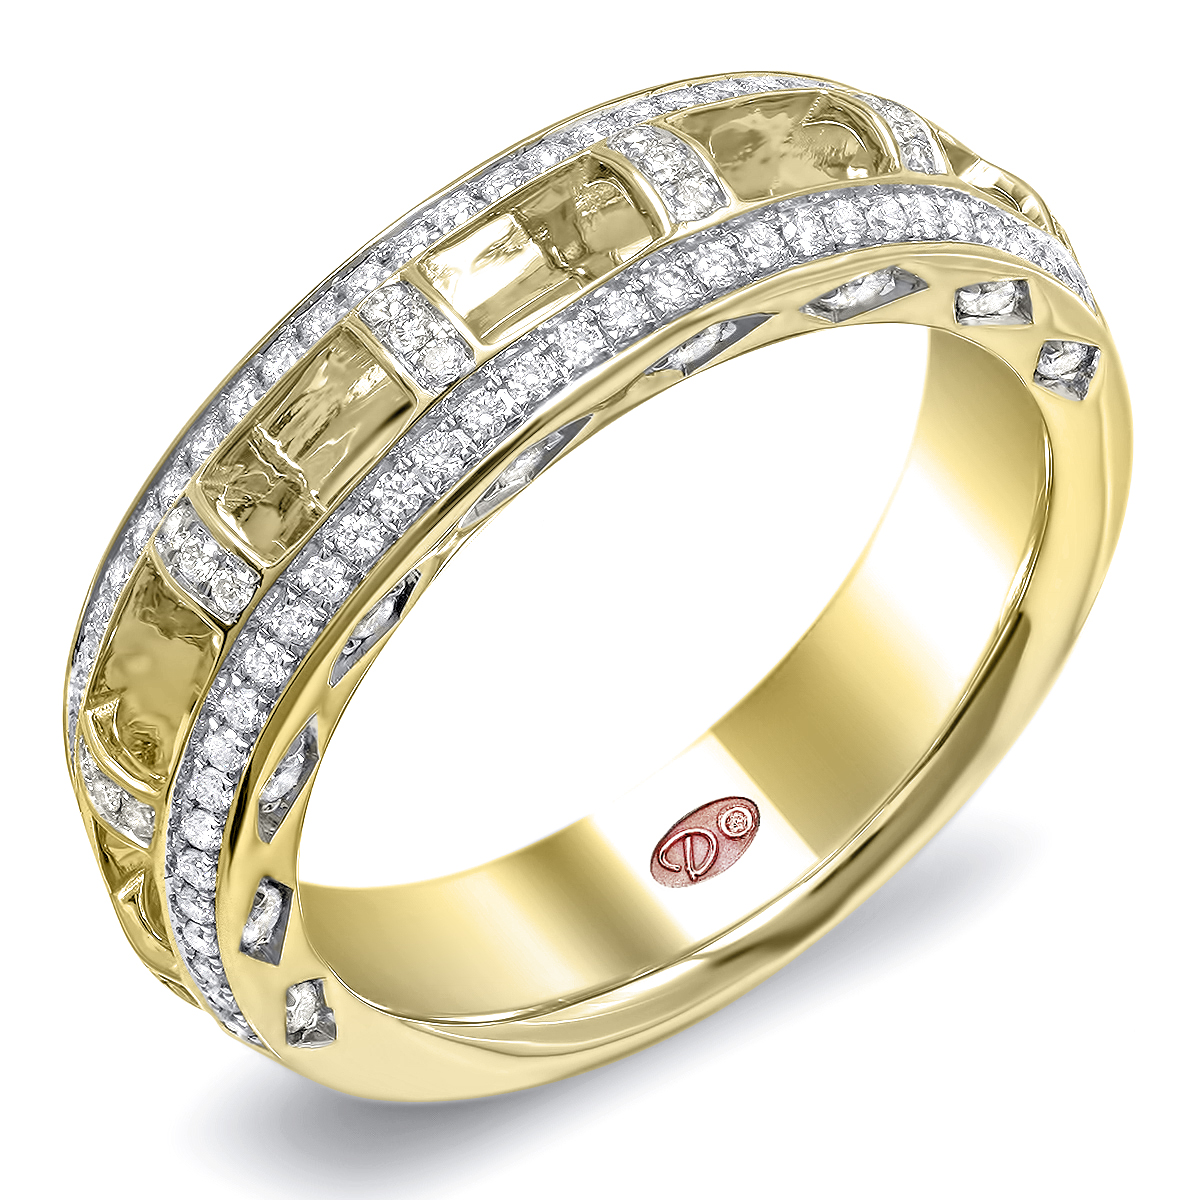 Mens Yellow Gold Rings | Demarco Bridal Jewelry Official Blog